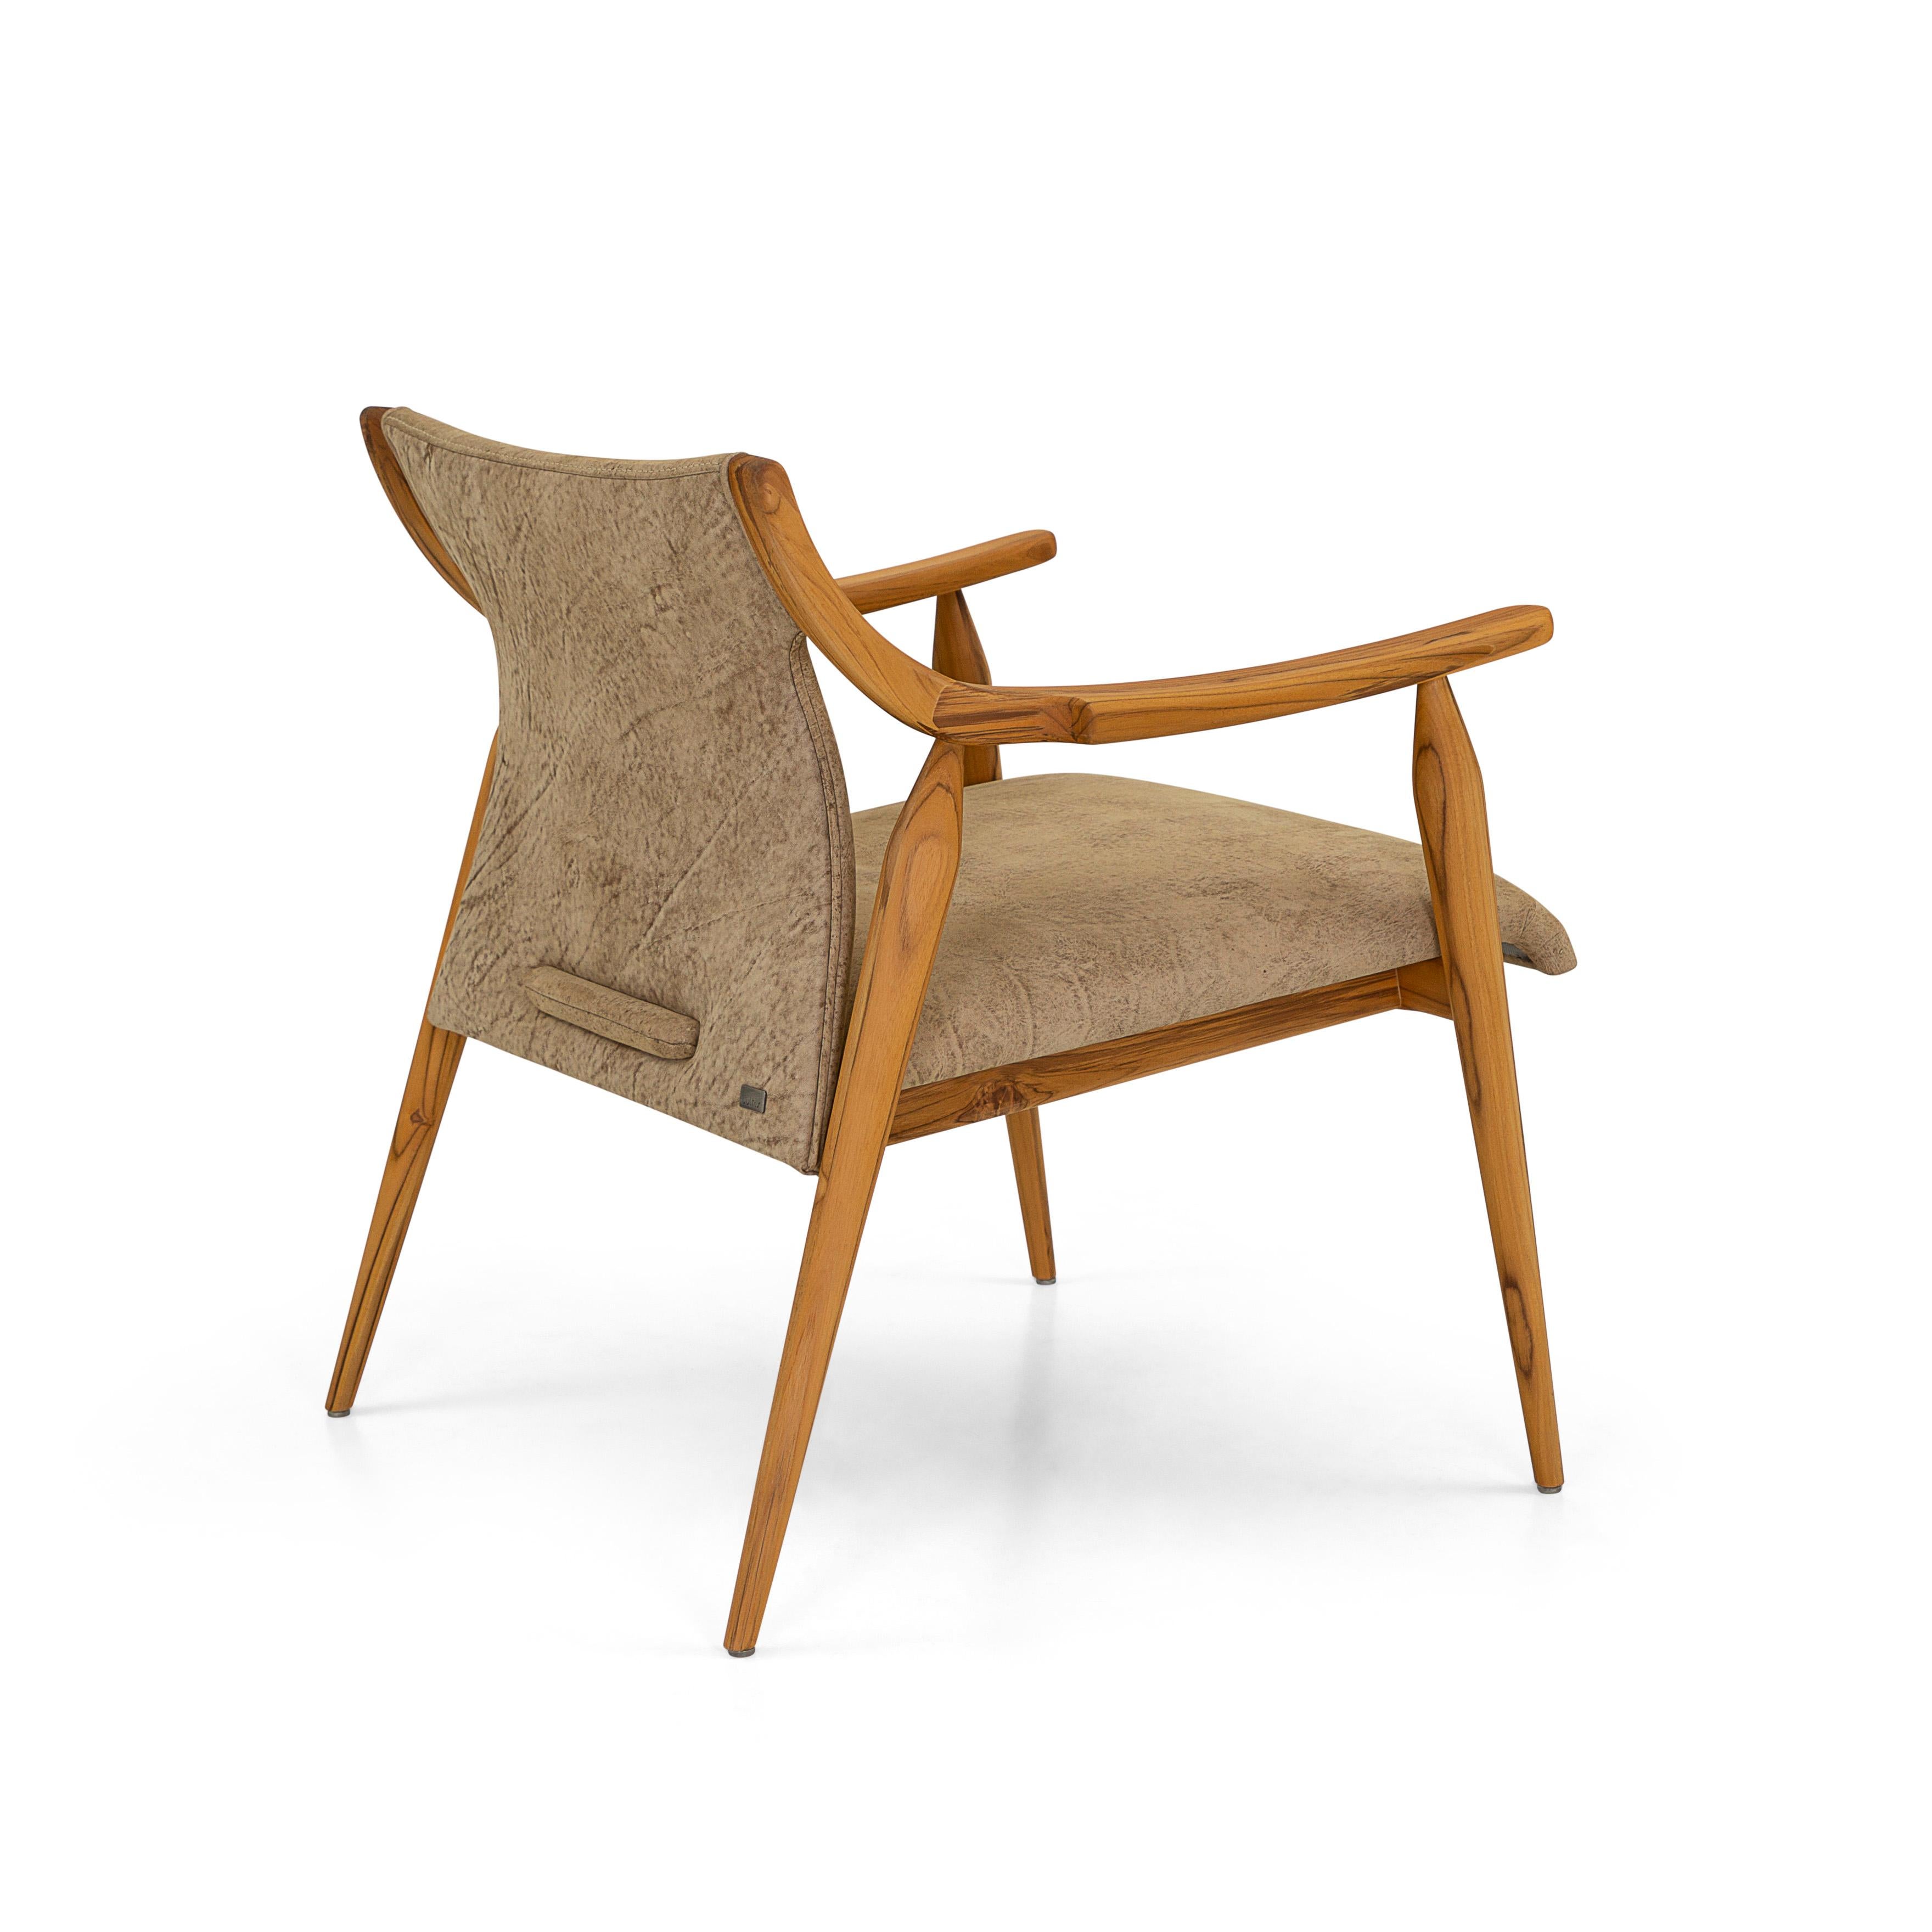 Brazilian Mince Armchair Featuring Curved Arms, Spindle Legs in Teak Wood Finish & Leather For Sale